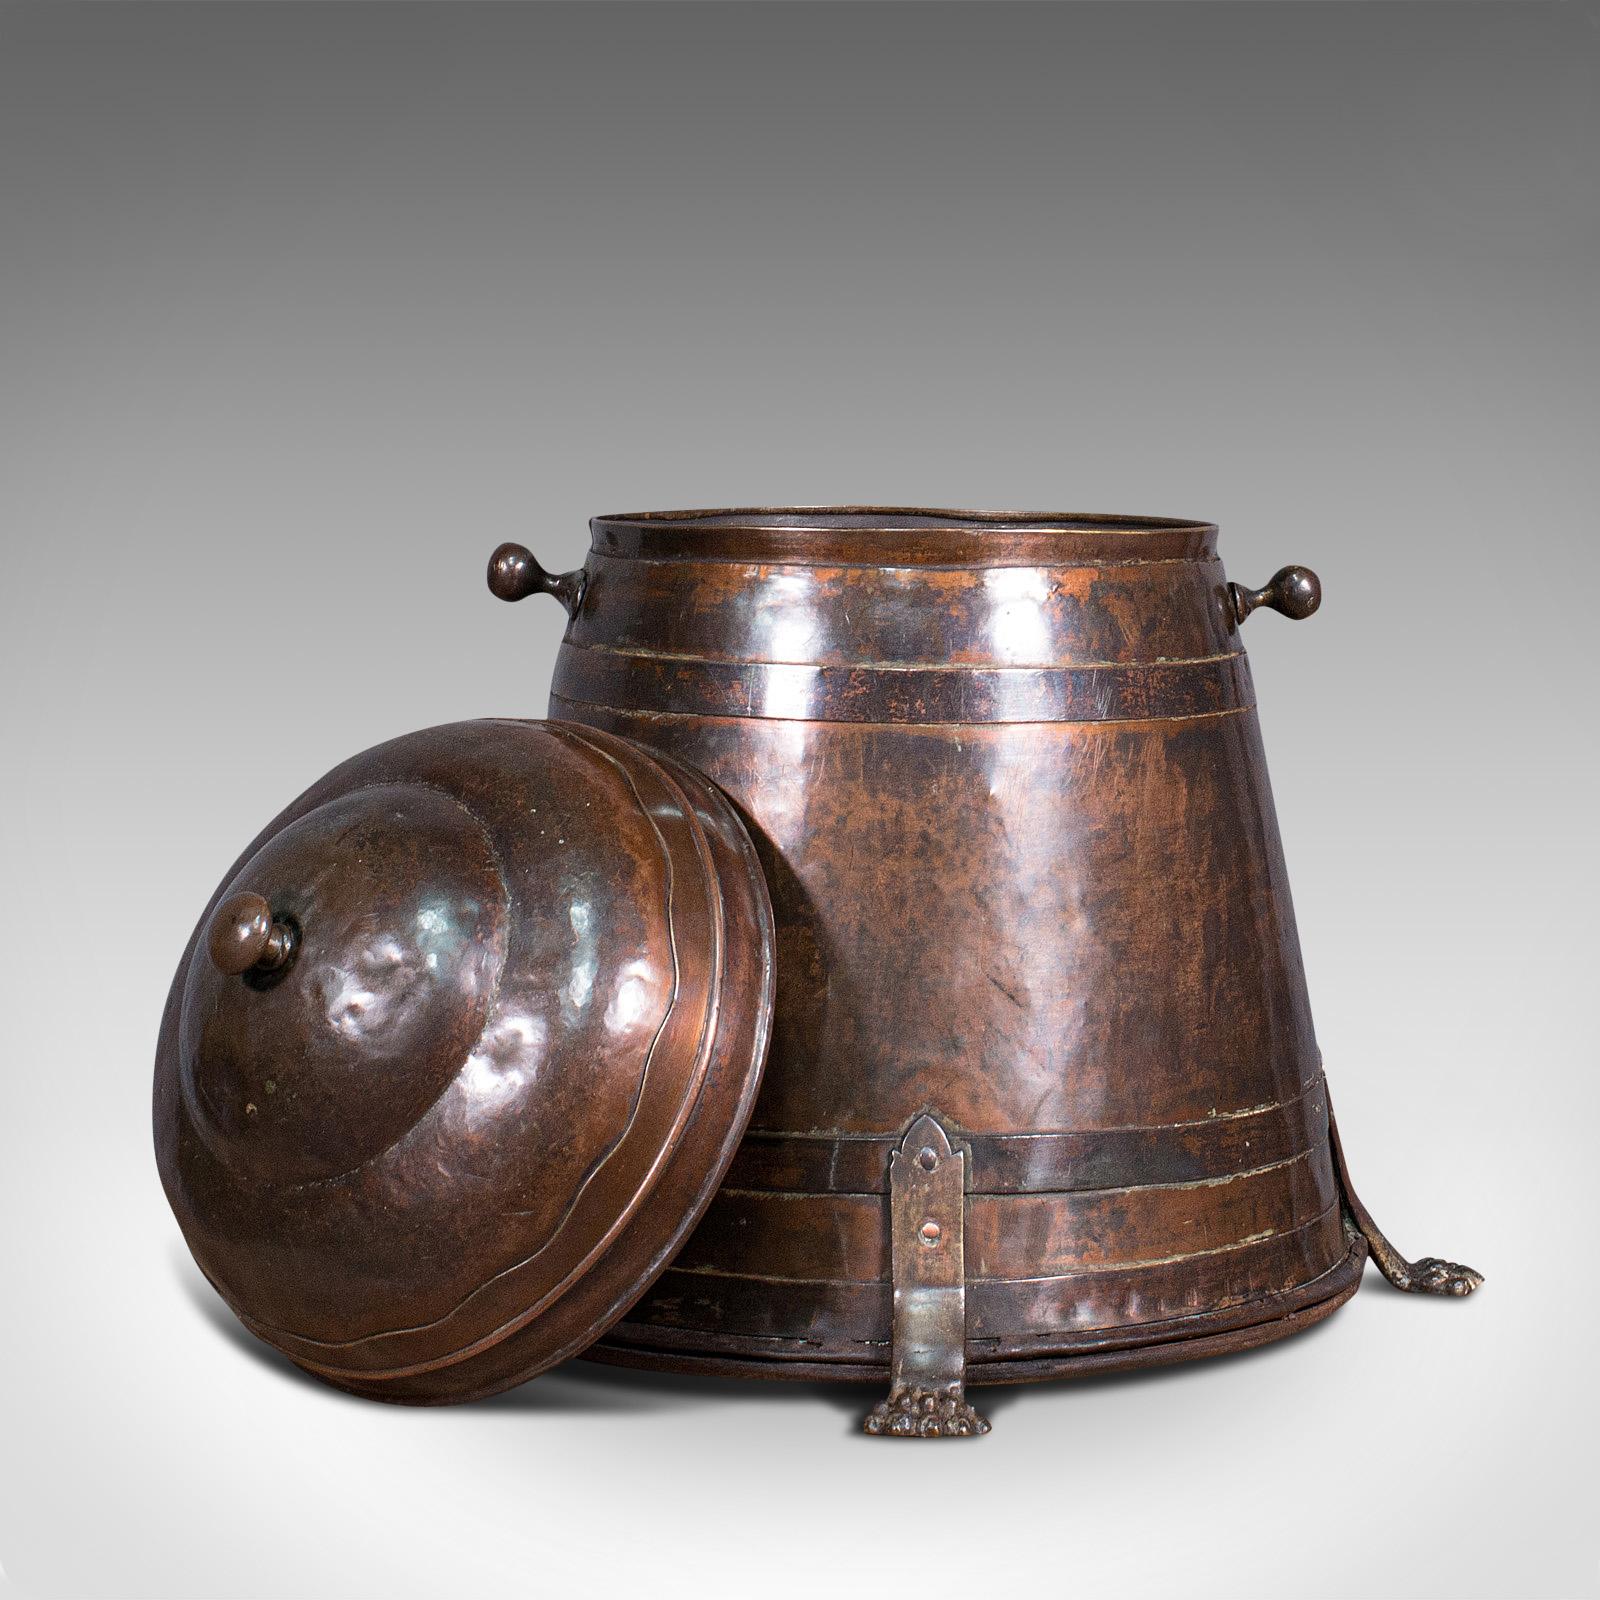 This is an antique beehive fireside store. An English, copper fire bucket or coal bin, dating to the early Victorian period, circa 1850.

Fascinating tapered form and colouration
Displays a desirable aged patina
Pleasingly tarnished copper with